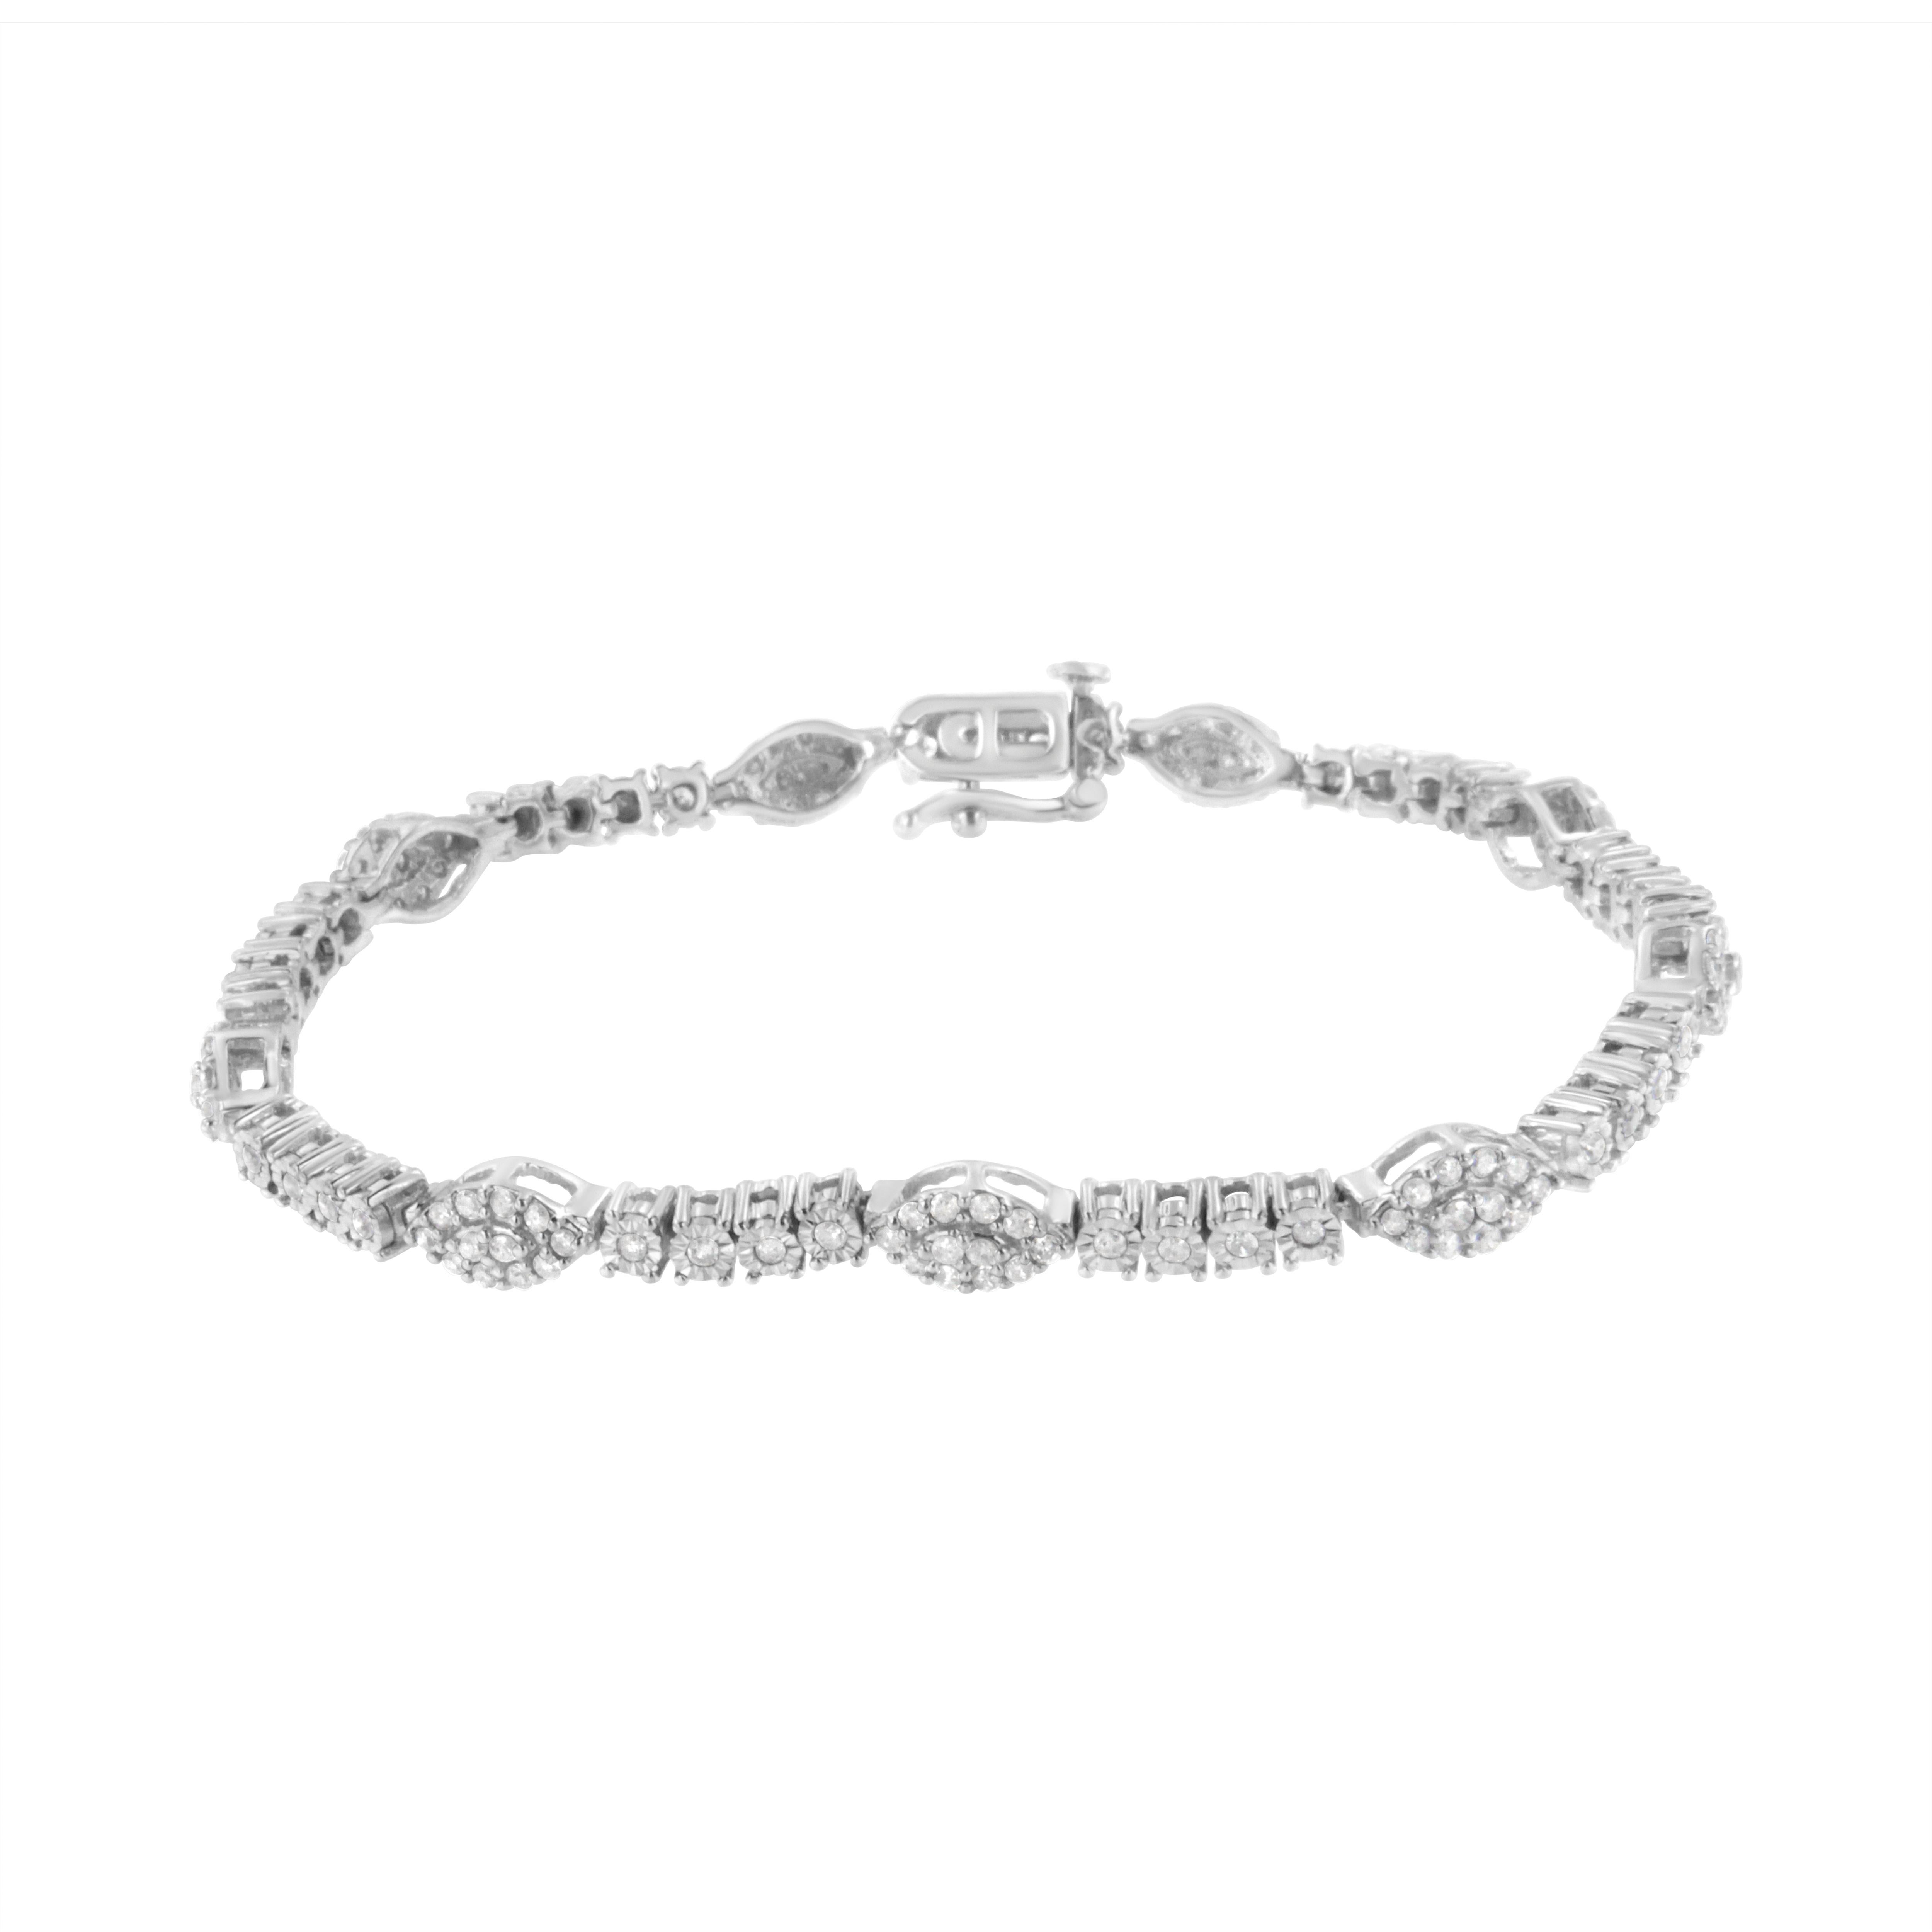 Four miracle set round cut diamonds connect with each other to create one of the links of this delicate tennis bracelet. Prong set round cut diamonds create an almond shaped cluster that alternates with the miracle set diamond chain to create this 1